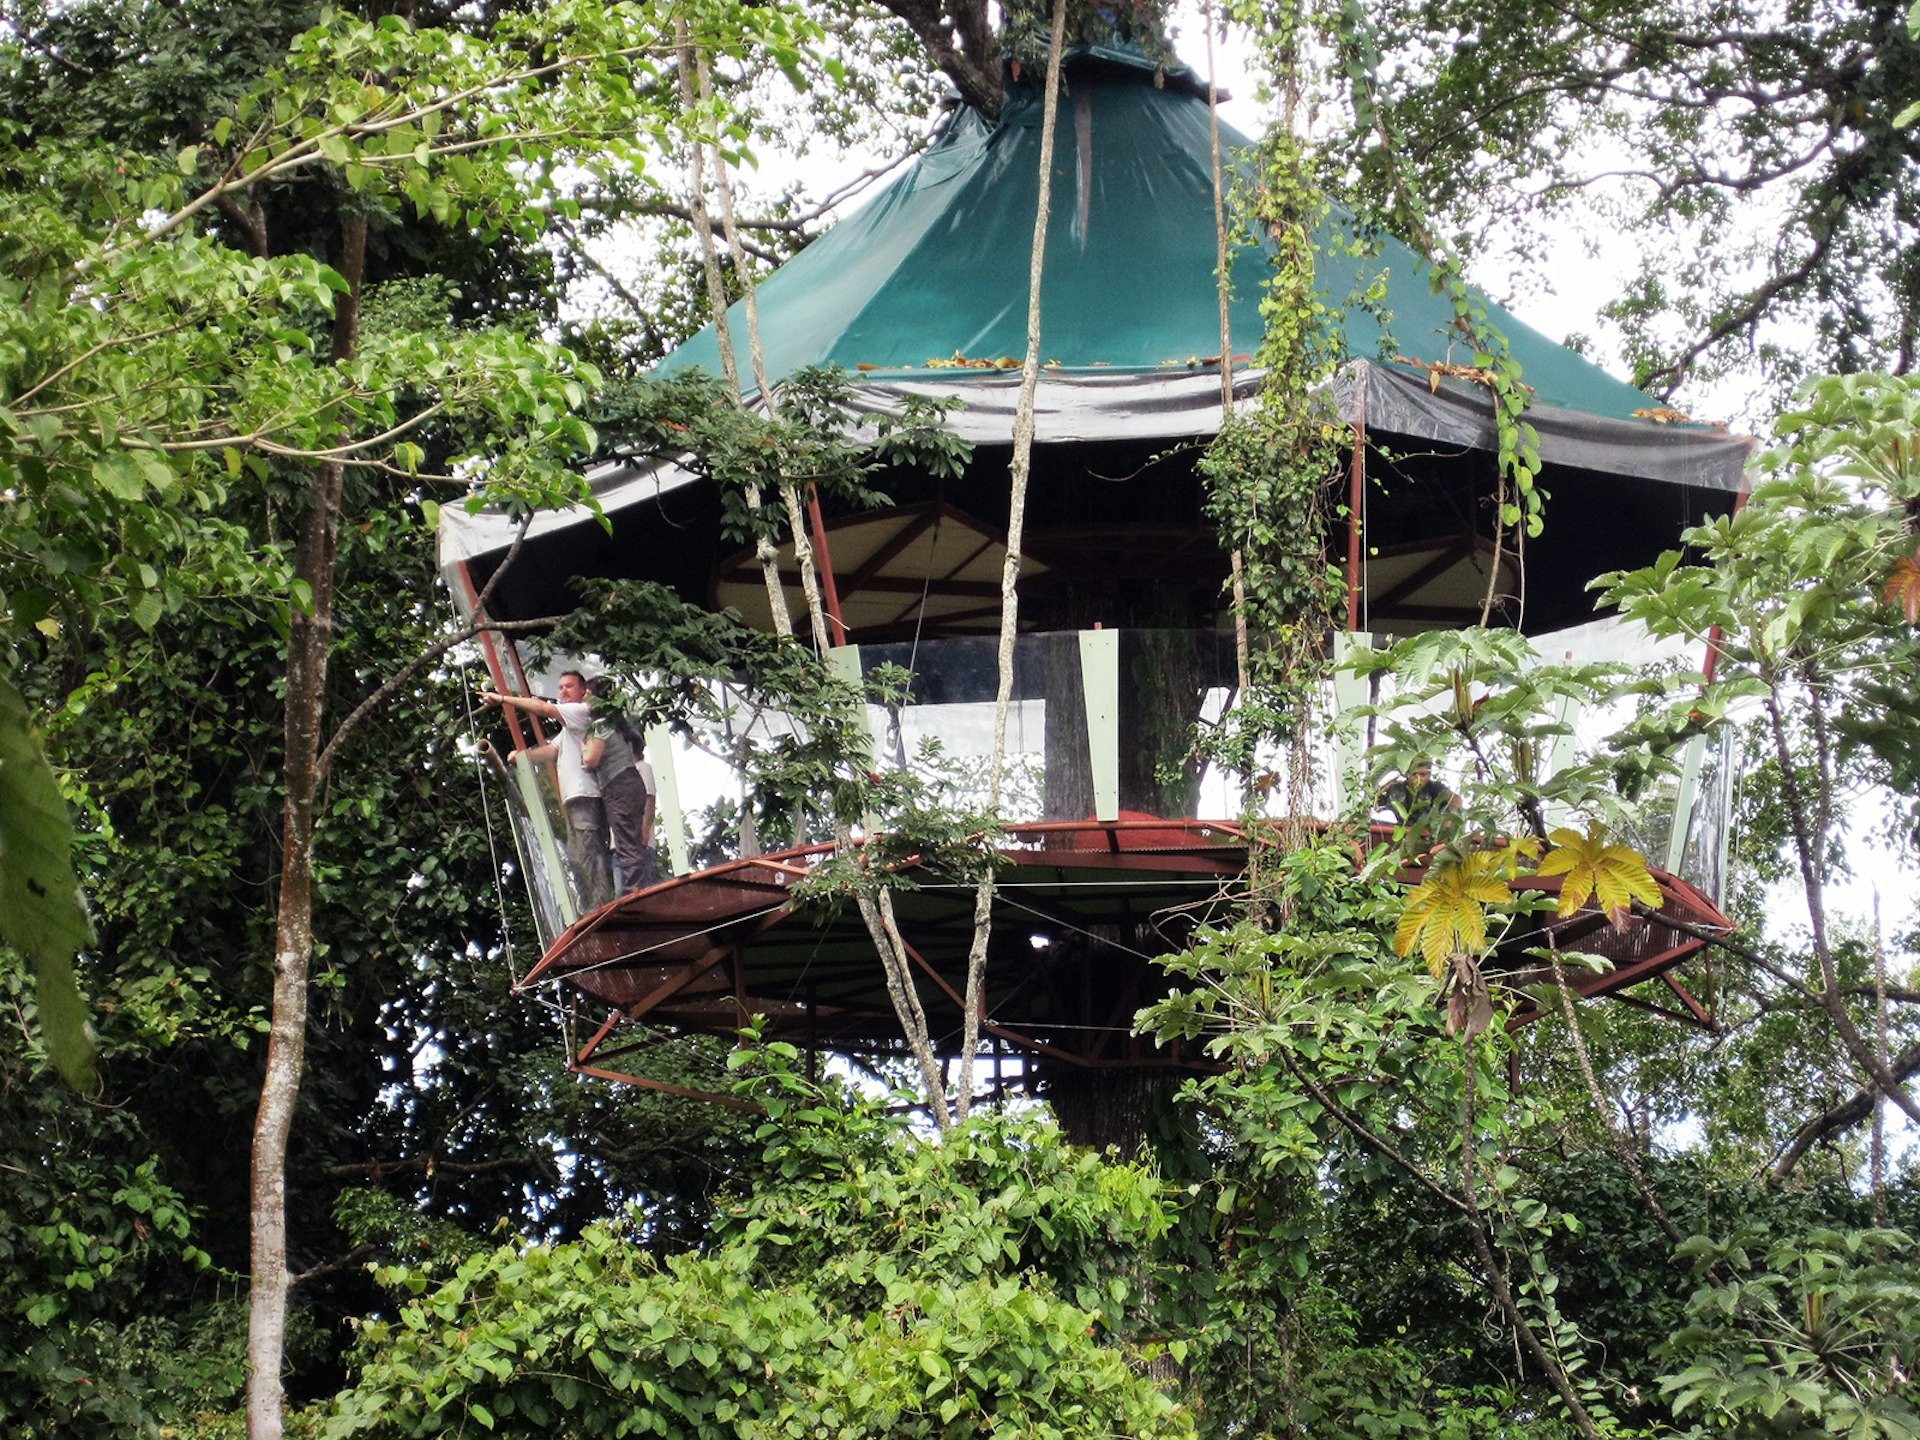 People standing in a tree house at Nature Observatorio, Costa Rica